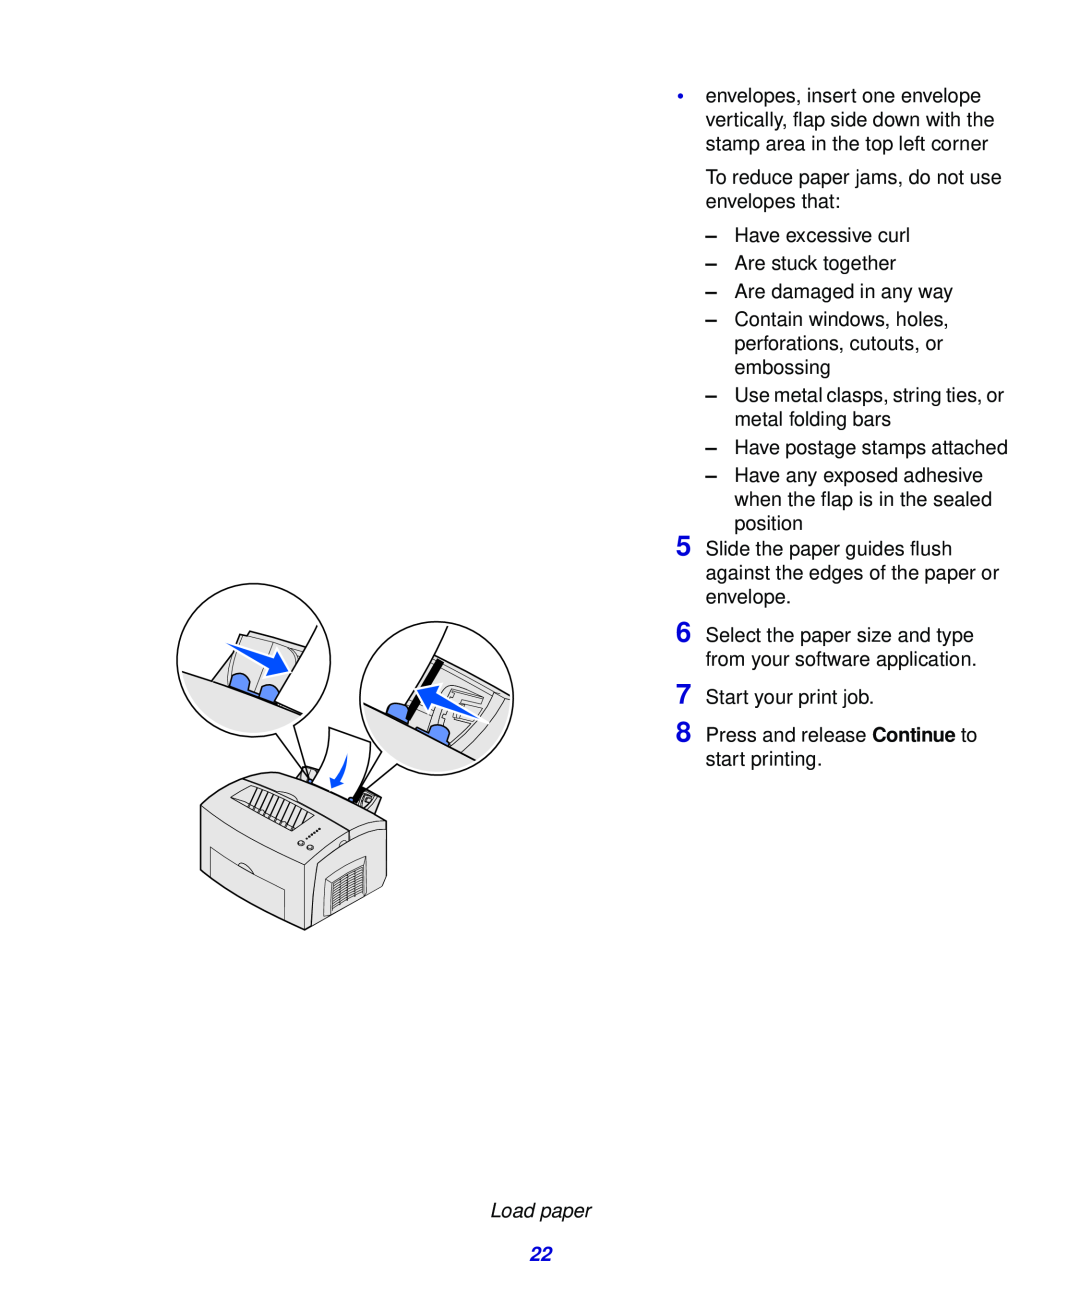 Lexmark 321, 323 setup guide To reduce paper jams, do not use envelopes that 